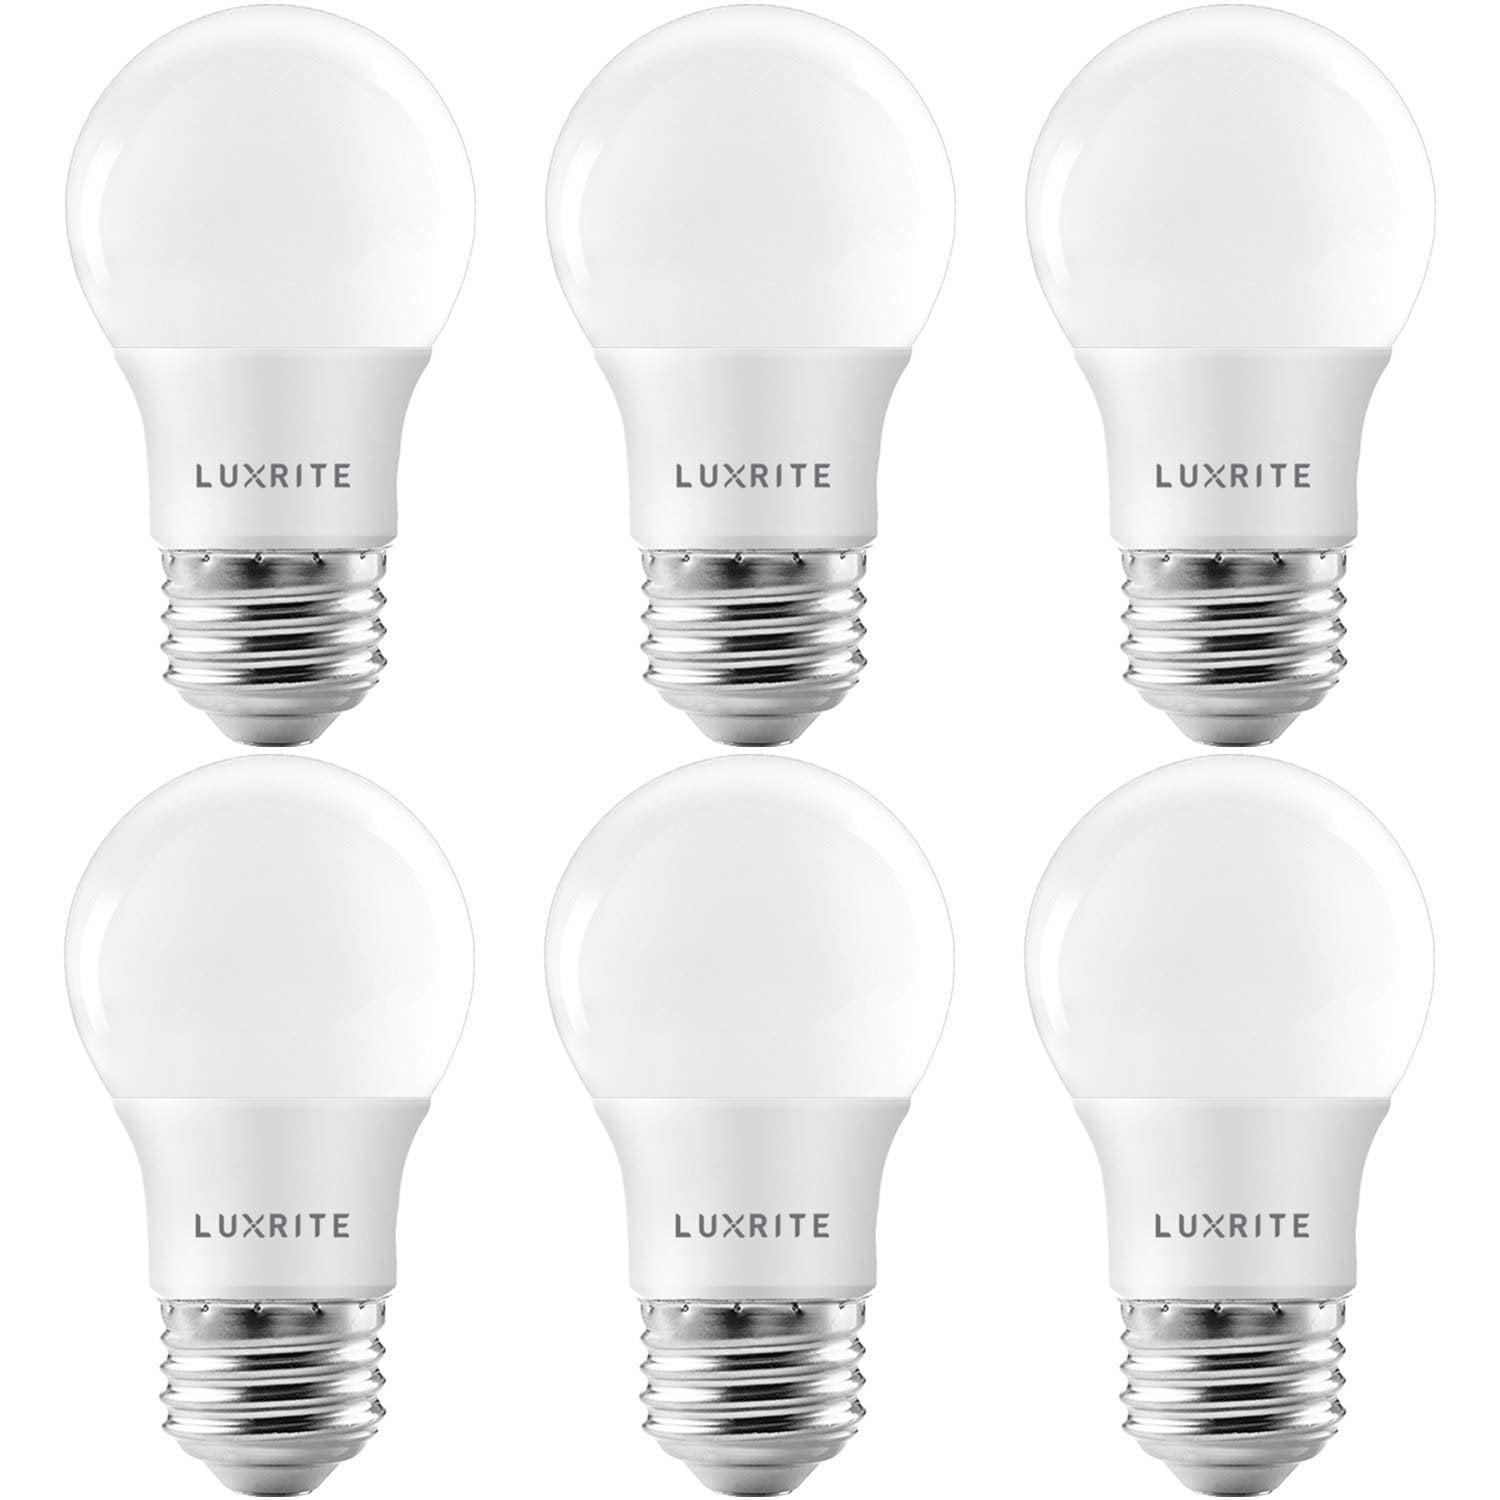 E26 Medium Base 60W Equivalent 500 Lumens 6 Pack Dimmable 3000K Soft White LED 6W Flame Tip Frosted Filament Chandelier Light Bulb Xtricity Energy Star, 120V 